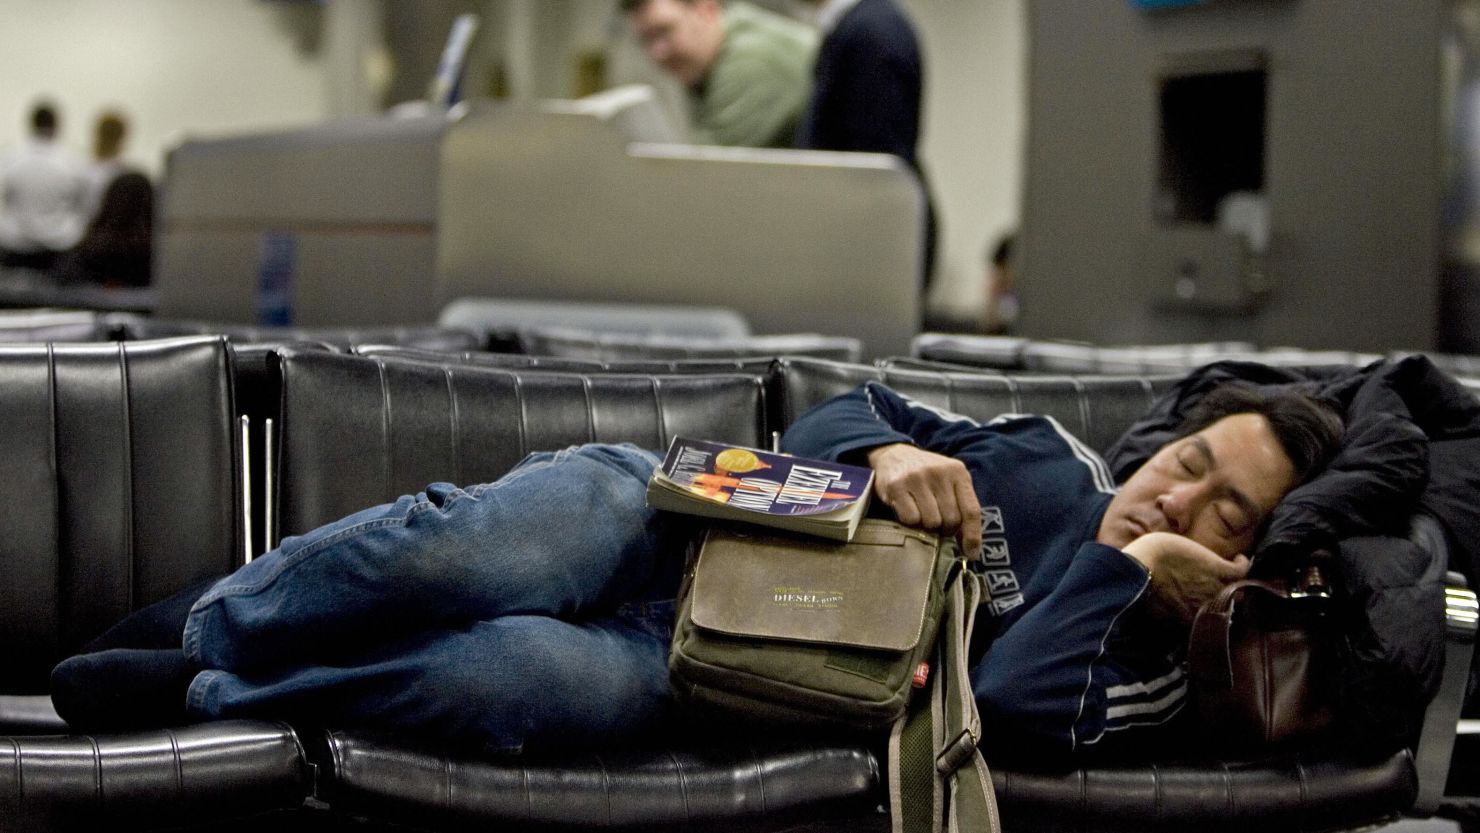 Jet lag is the scourge of the long haul traveler, but there may finally be a solution.